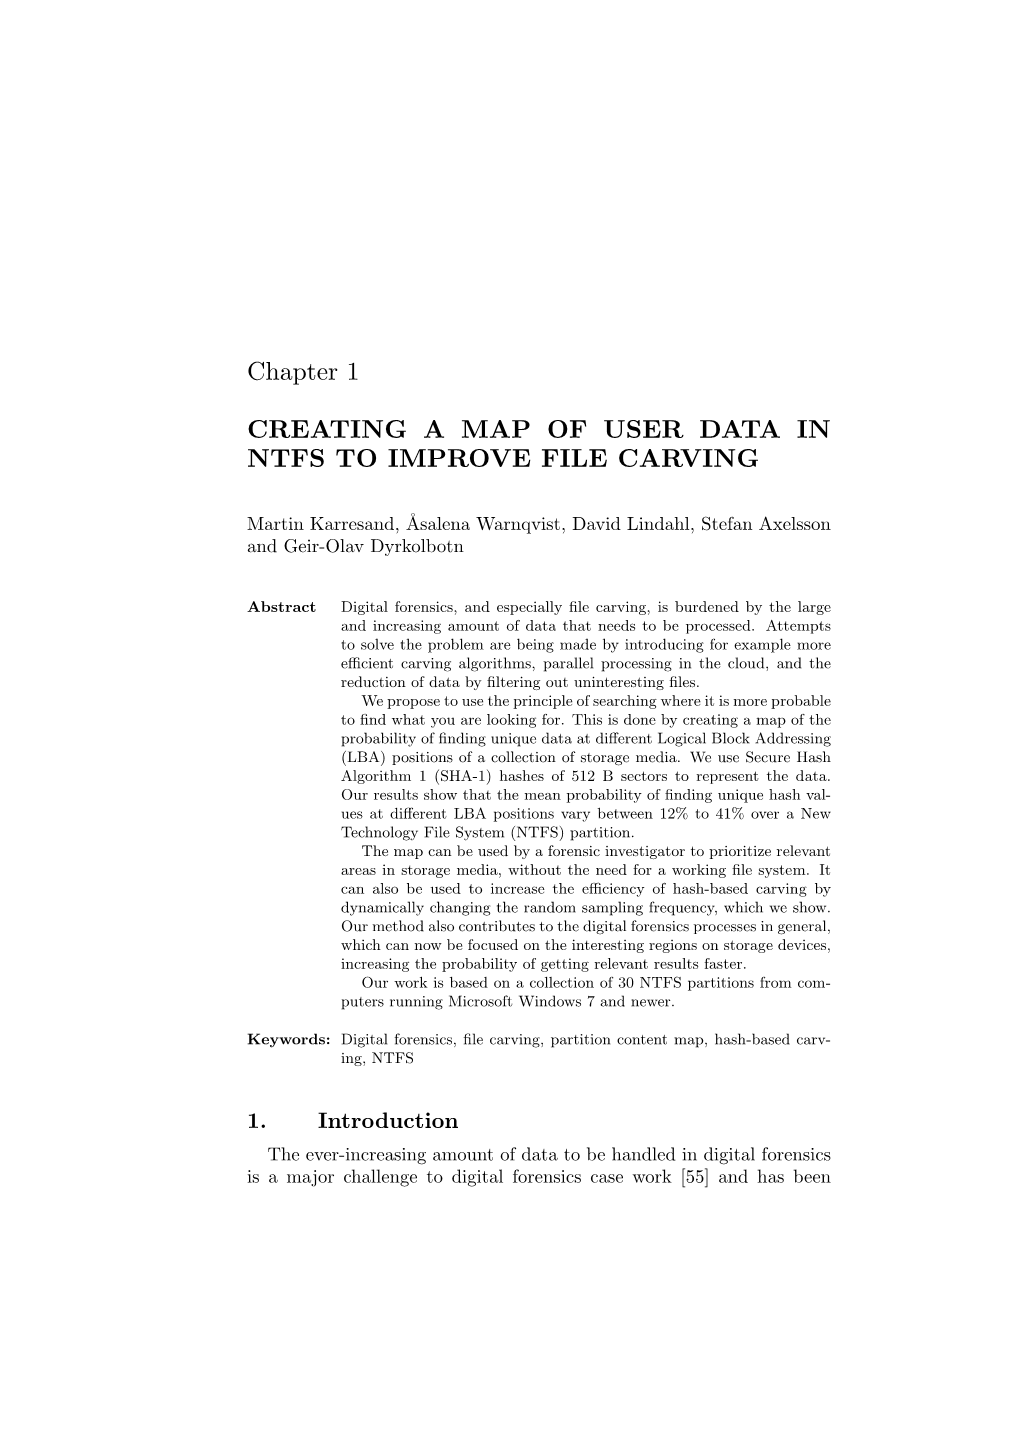 Chapter 1 CREATING a MAP of USER DATA in NTFS to IMPROVE